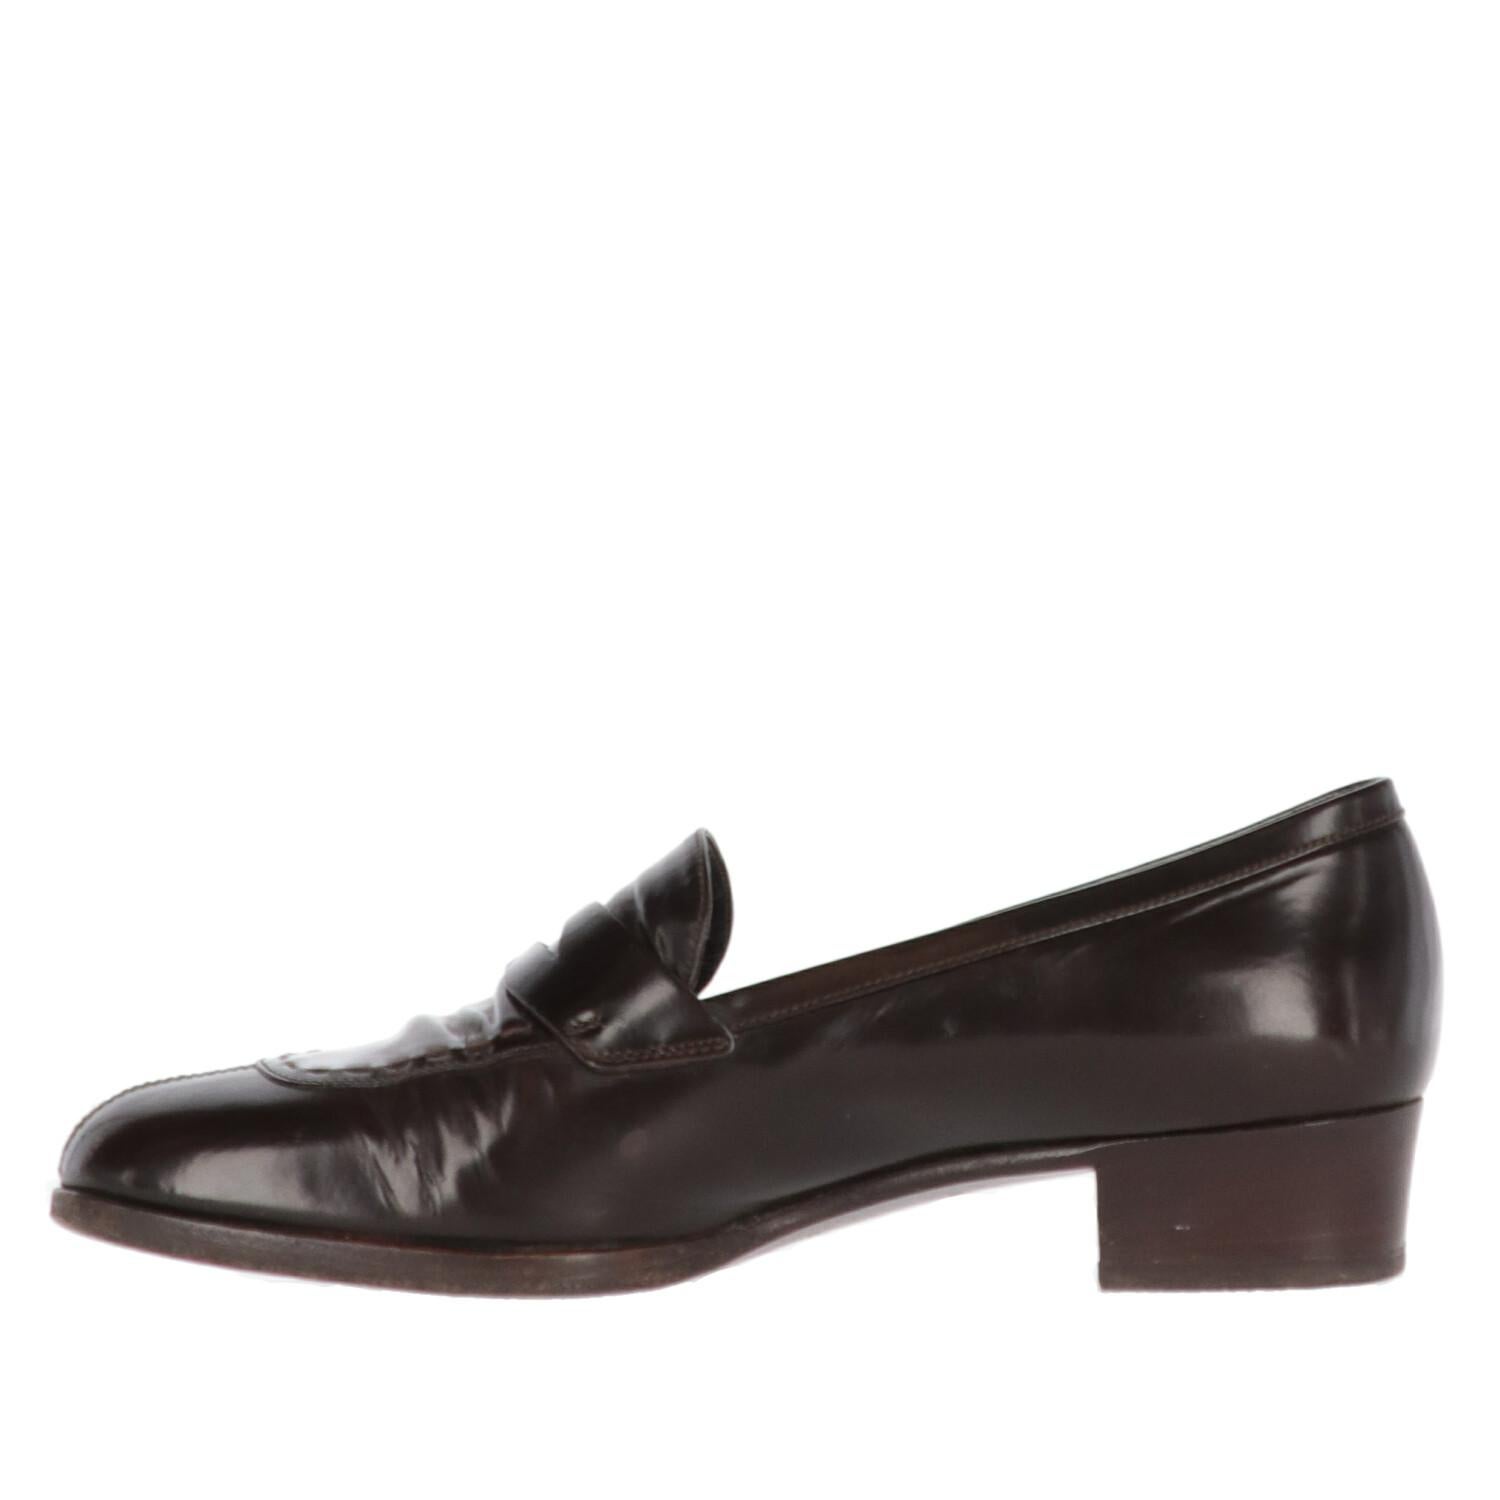 Prada brown leather heeled loafers. Square toe and low heel.

The shoes show signs of wear and wrinkles on the leather, as shown in the pictures.
Years: 90s

Size: 35 EU

Heel height: 3 cm
Insole: 23,5 cm